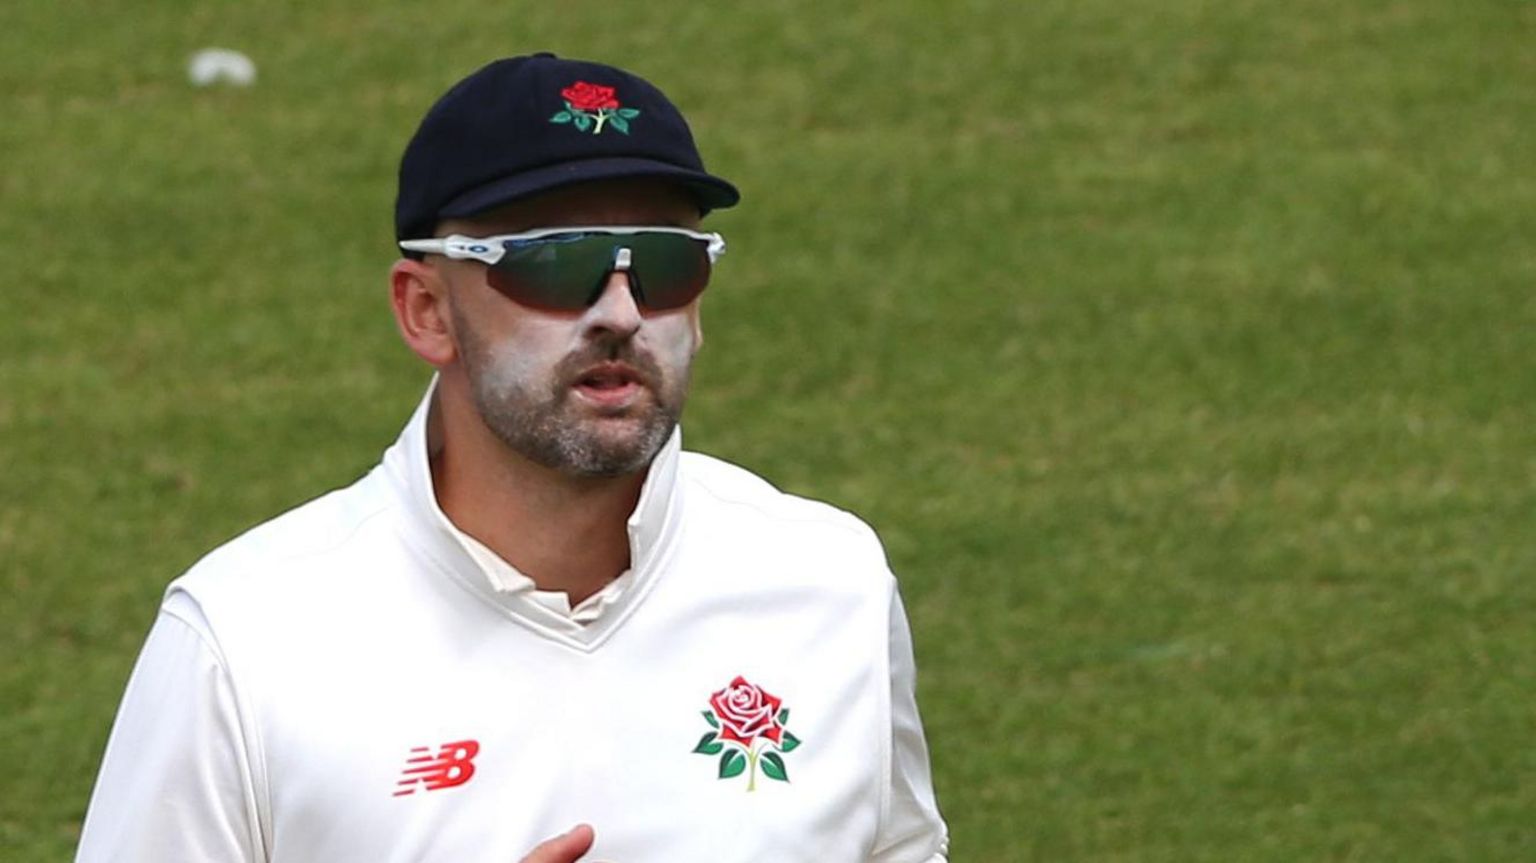 Nathan Lyon took 3-62 for Lancashire on the first day against Essex